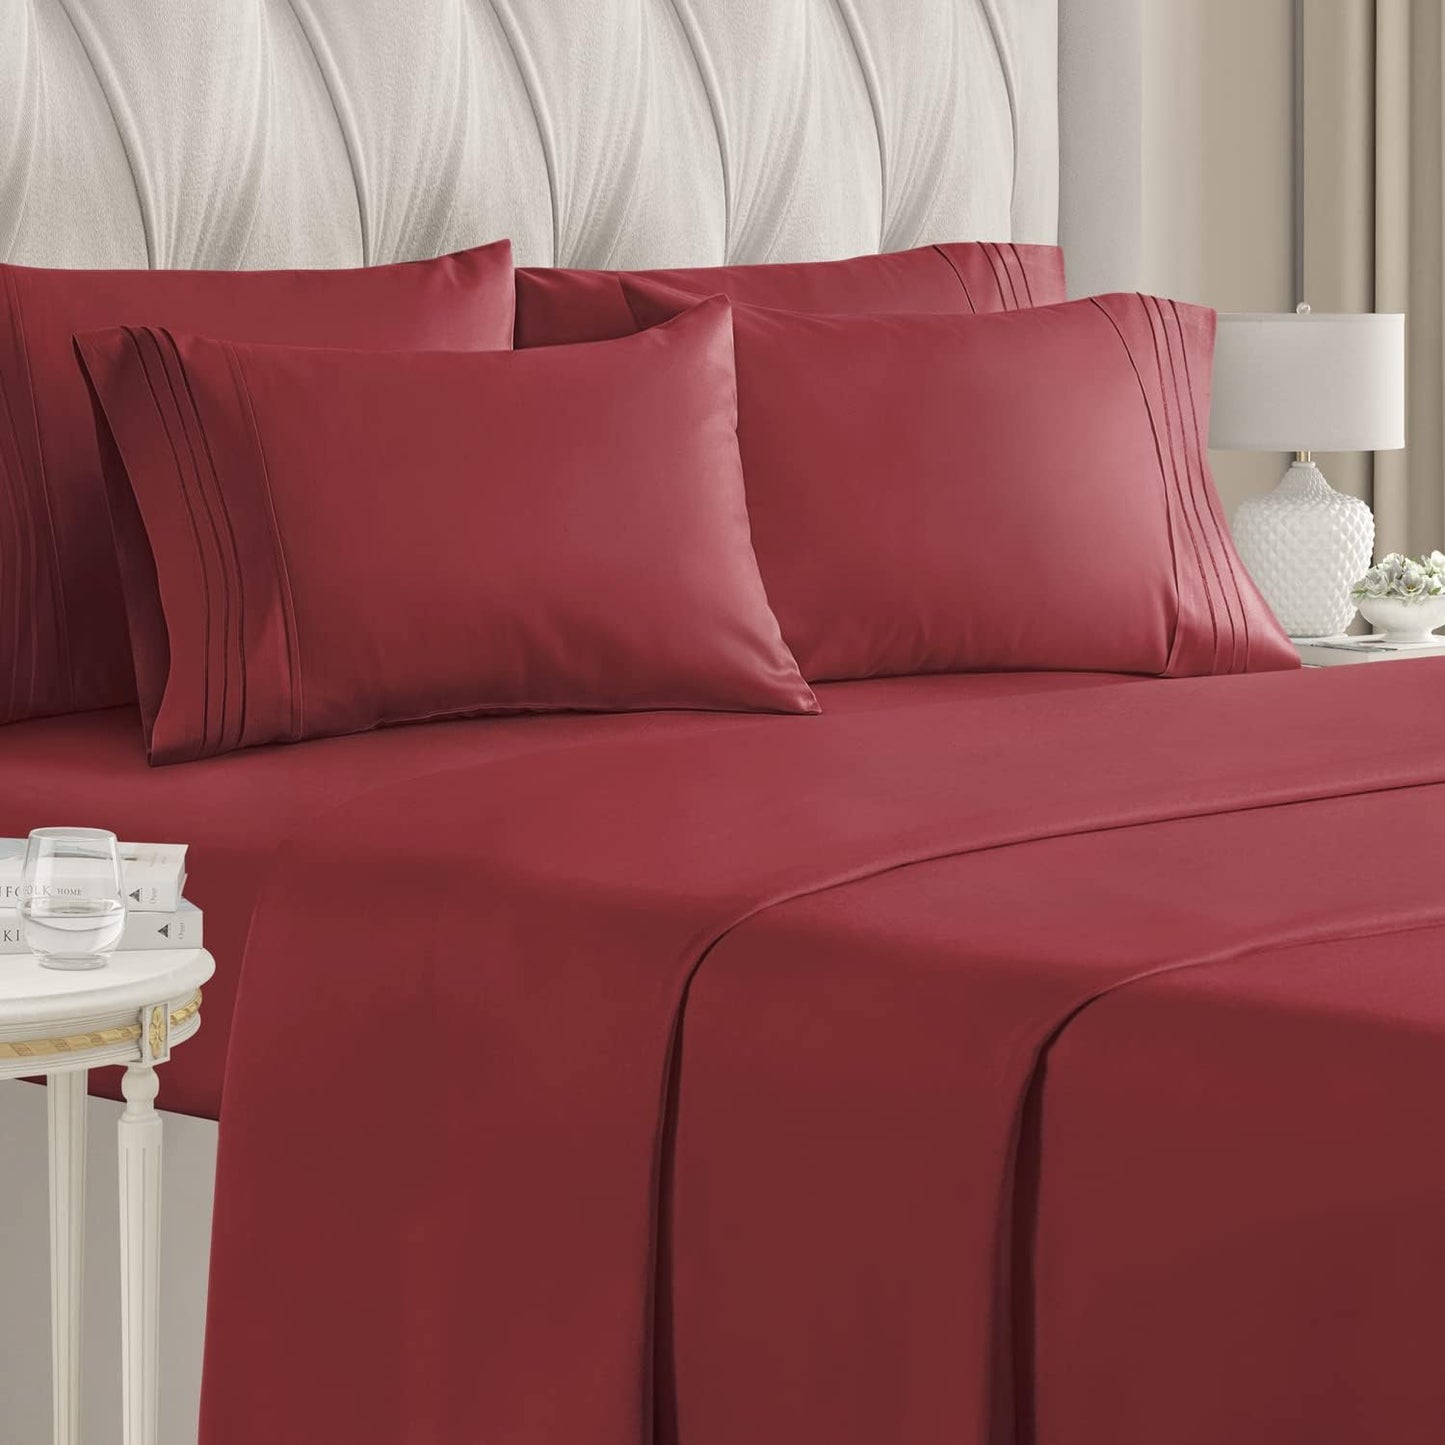 Luxury Ultra-Soft Bed Sheet Set | Hypoallergenic-Deep Pockets-Fade,Wrinkle,Stain Resistant-1800 Thread Count-6 Pieces